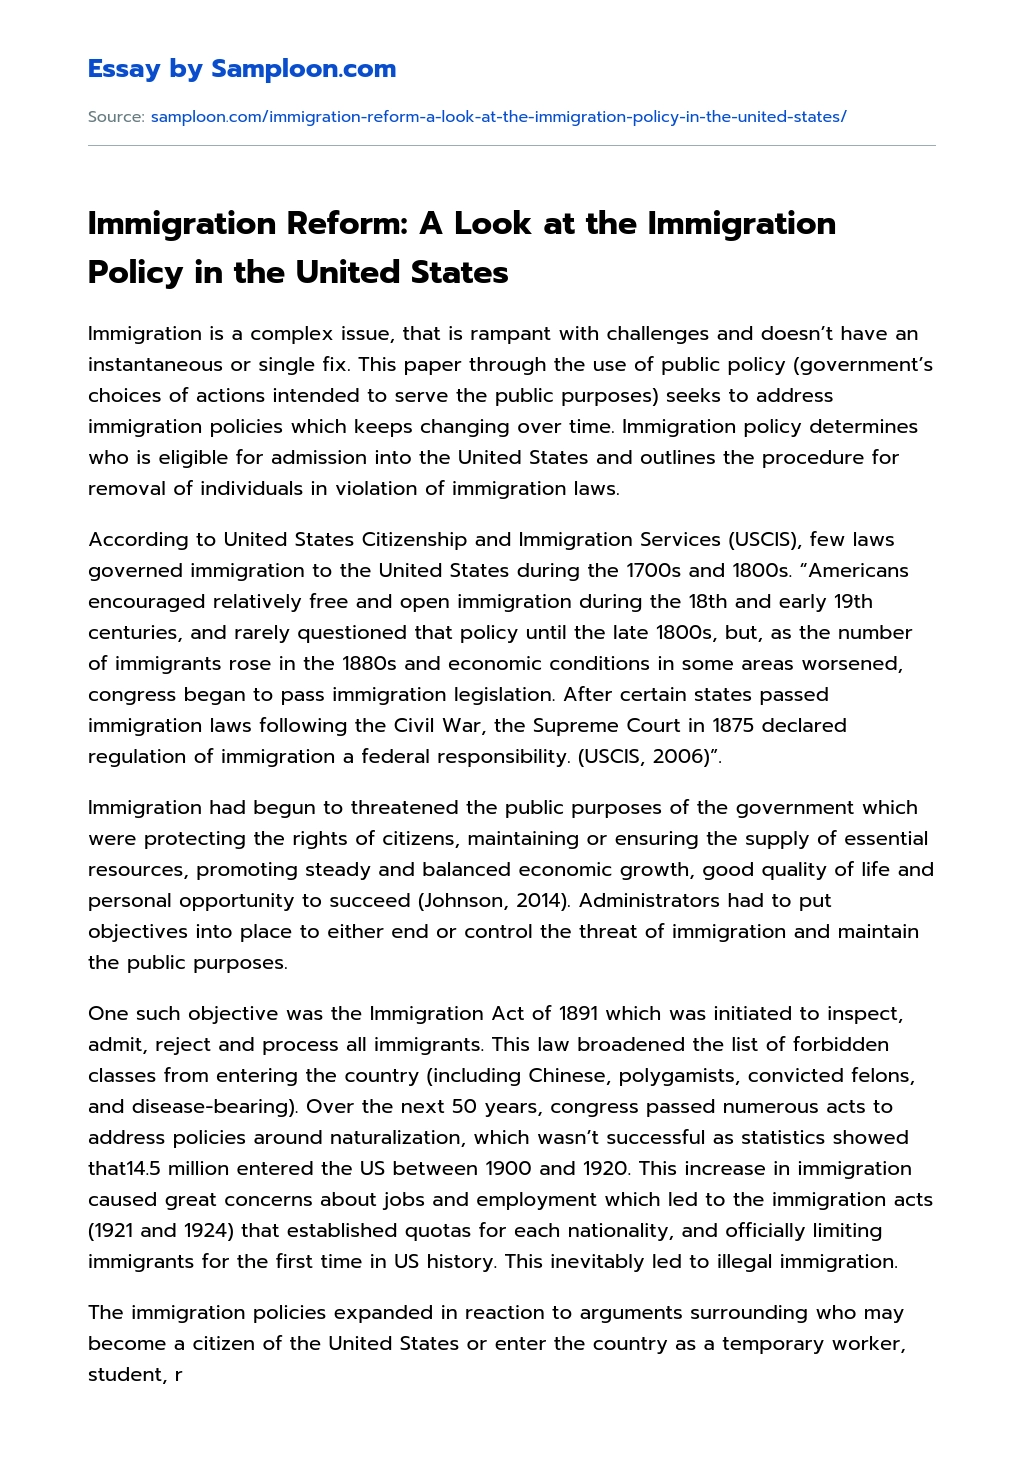 Immigration Reform: A Look at the Immigration Policy in the United States essay